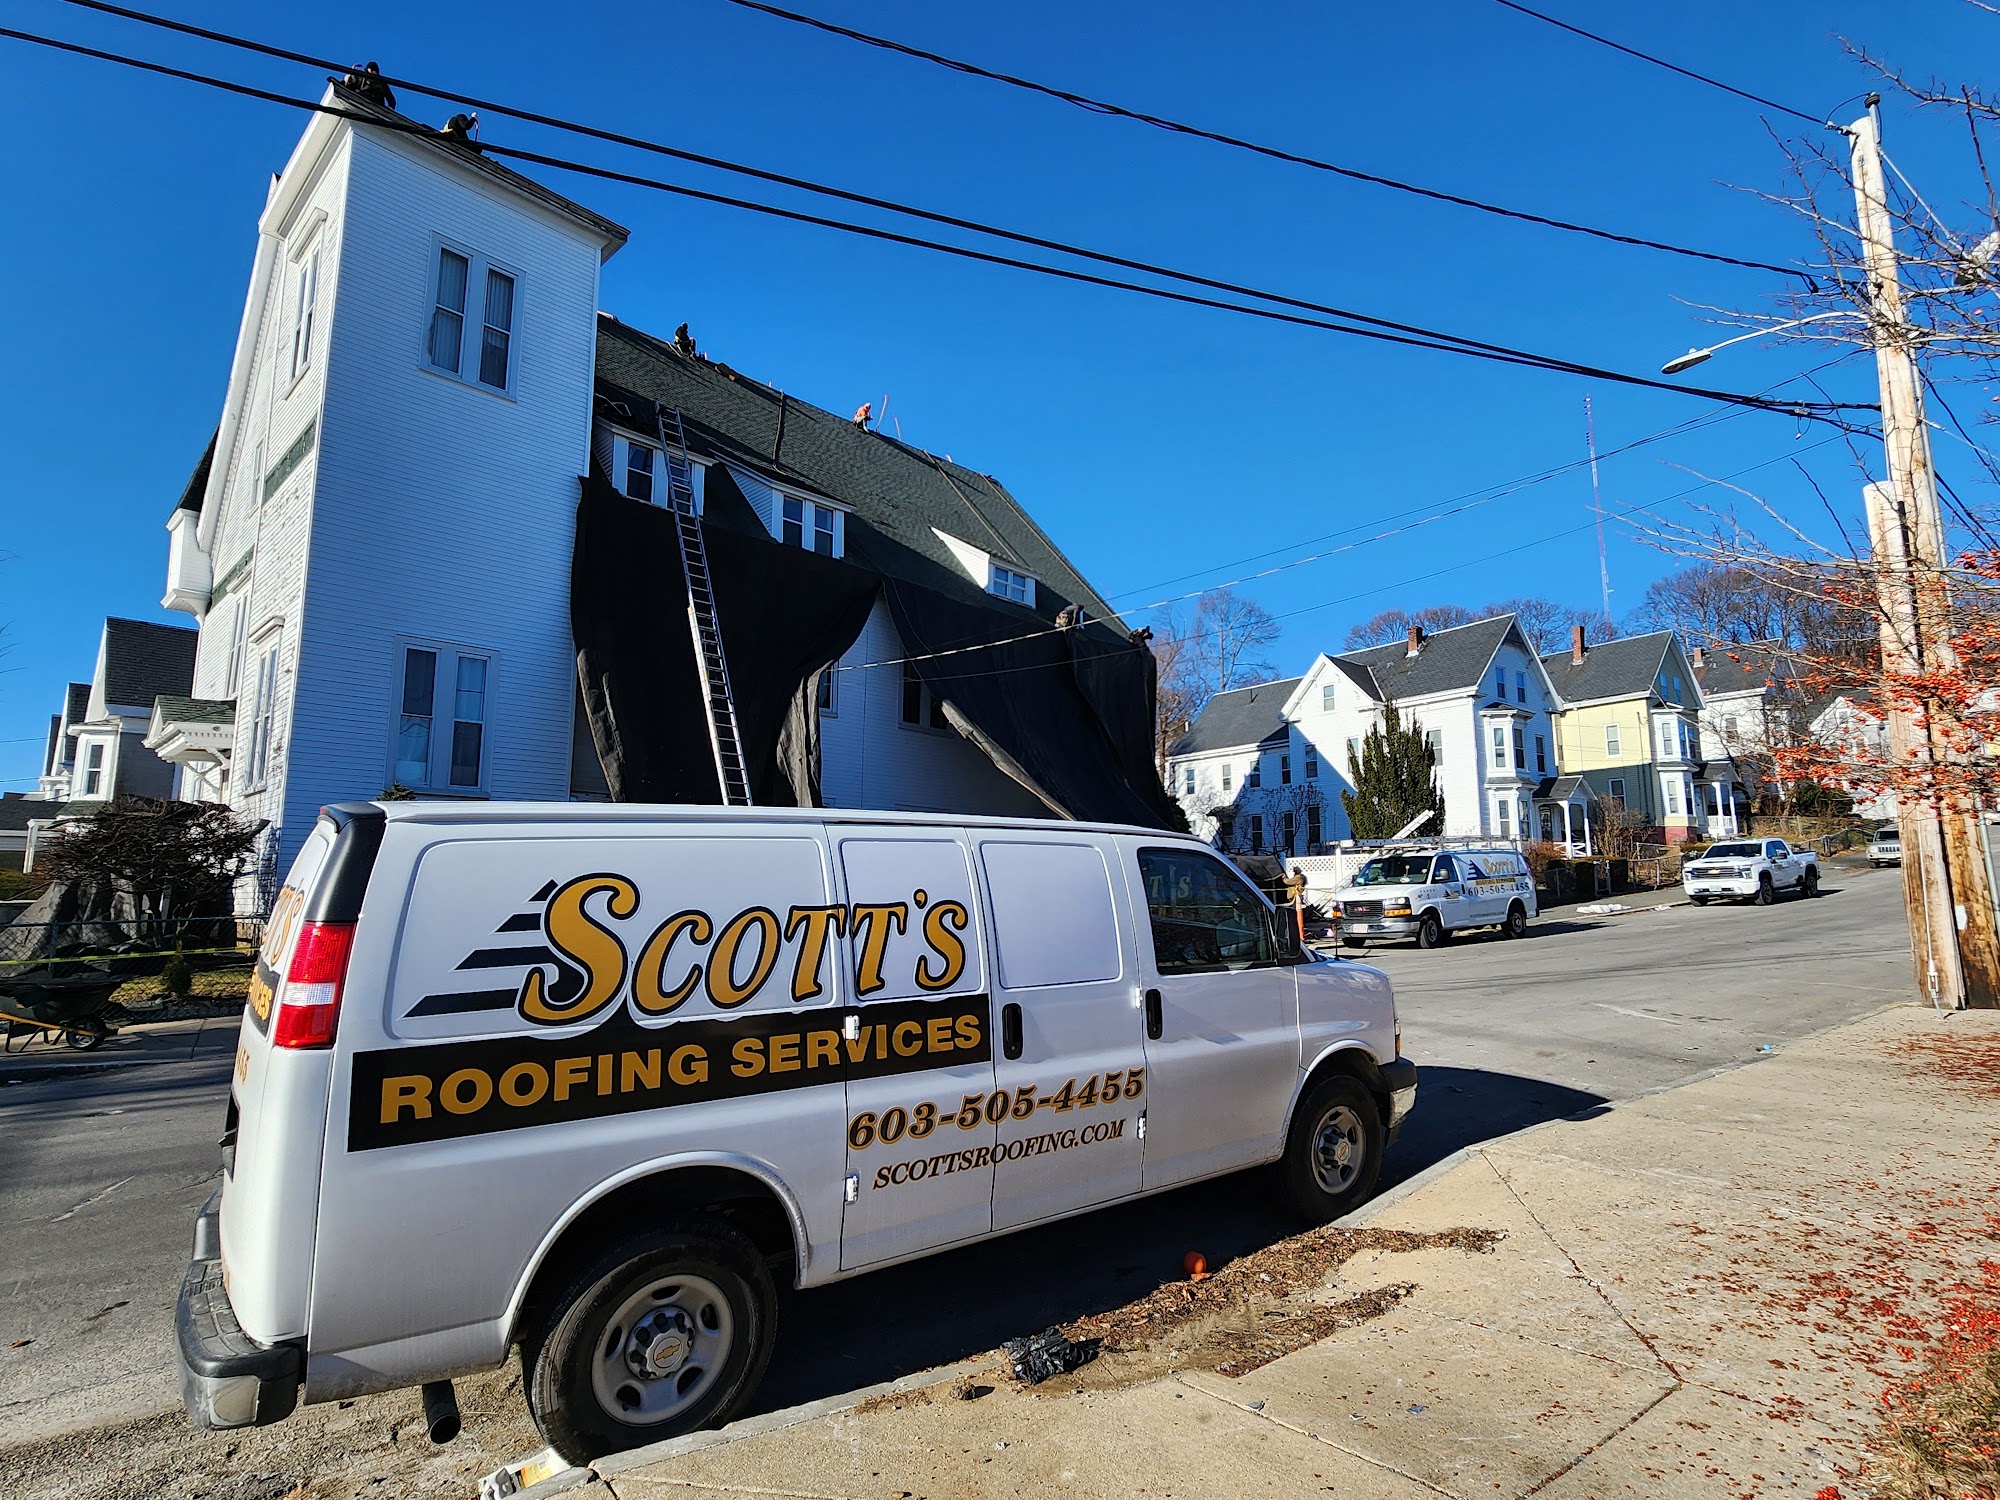 Scott's Roofing Services